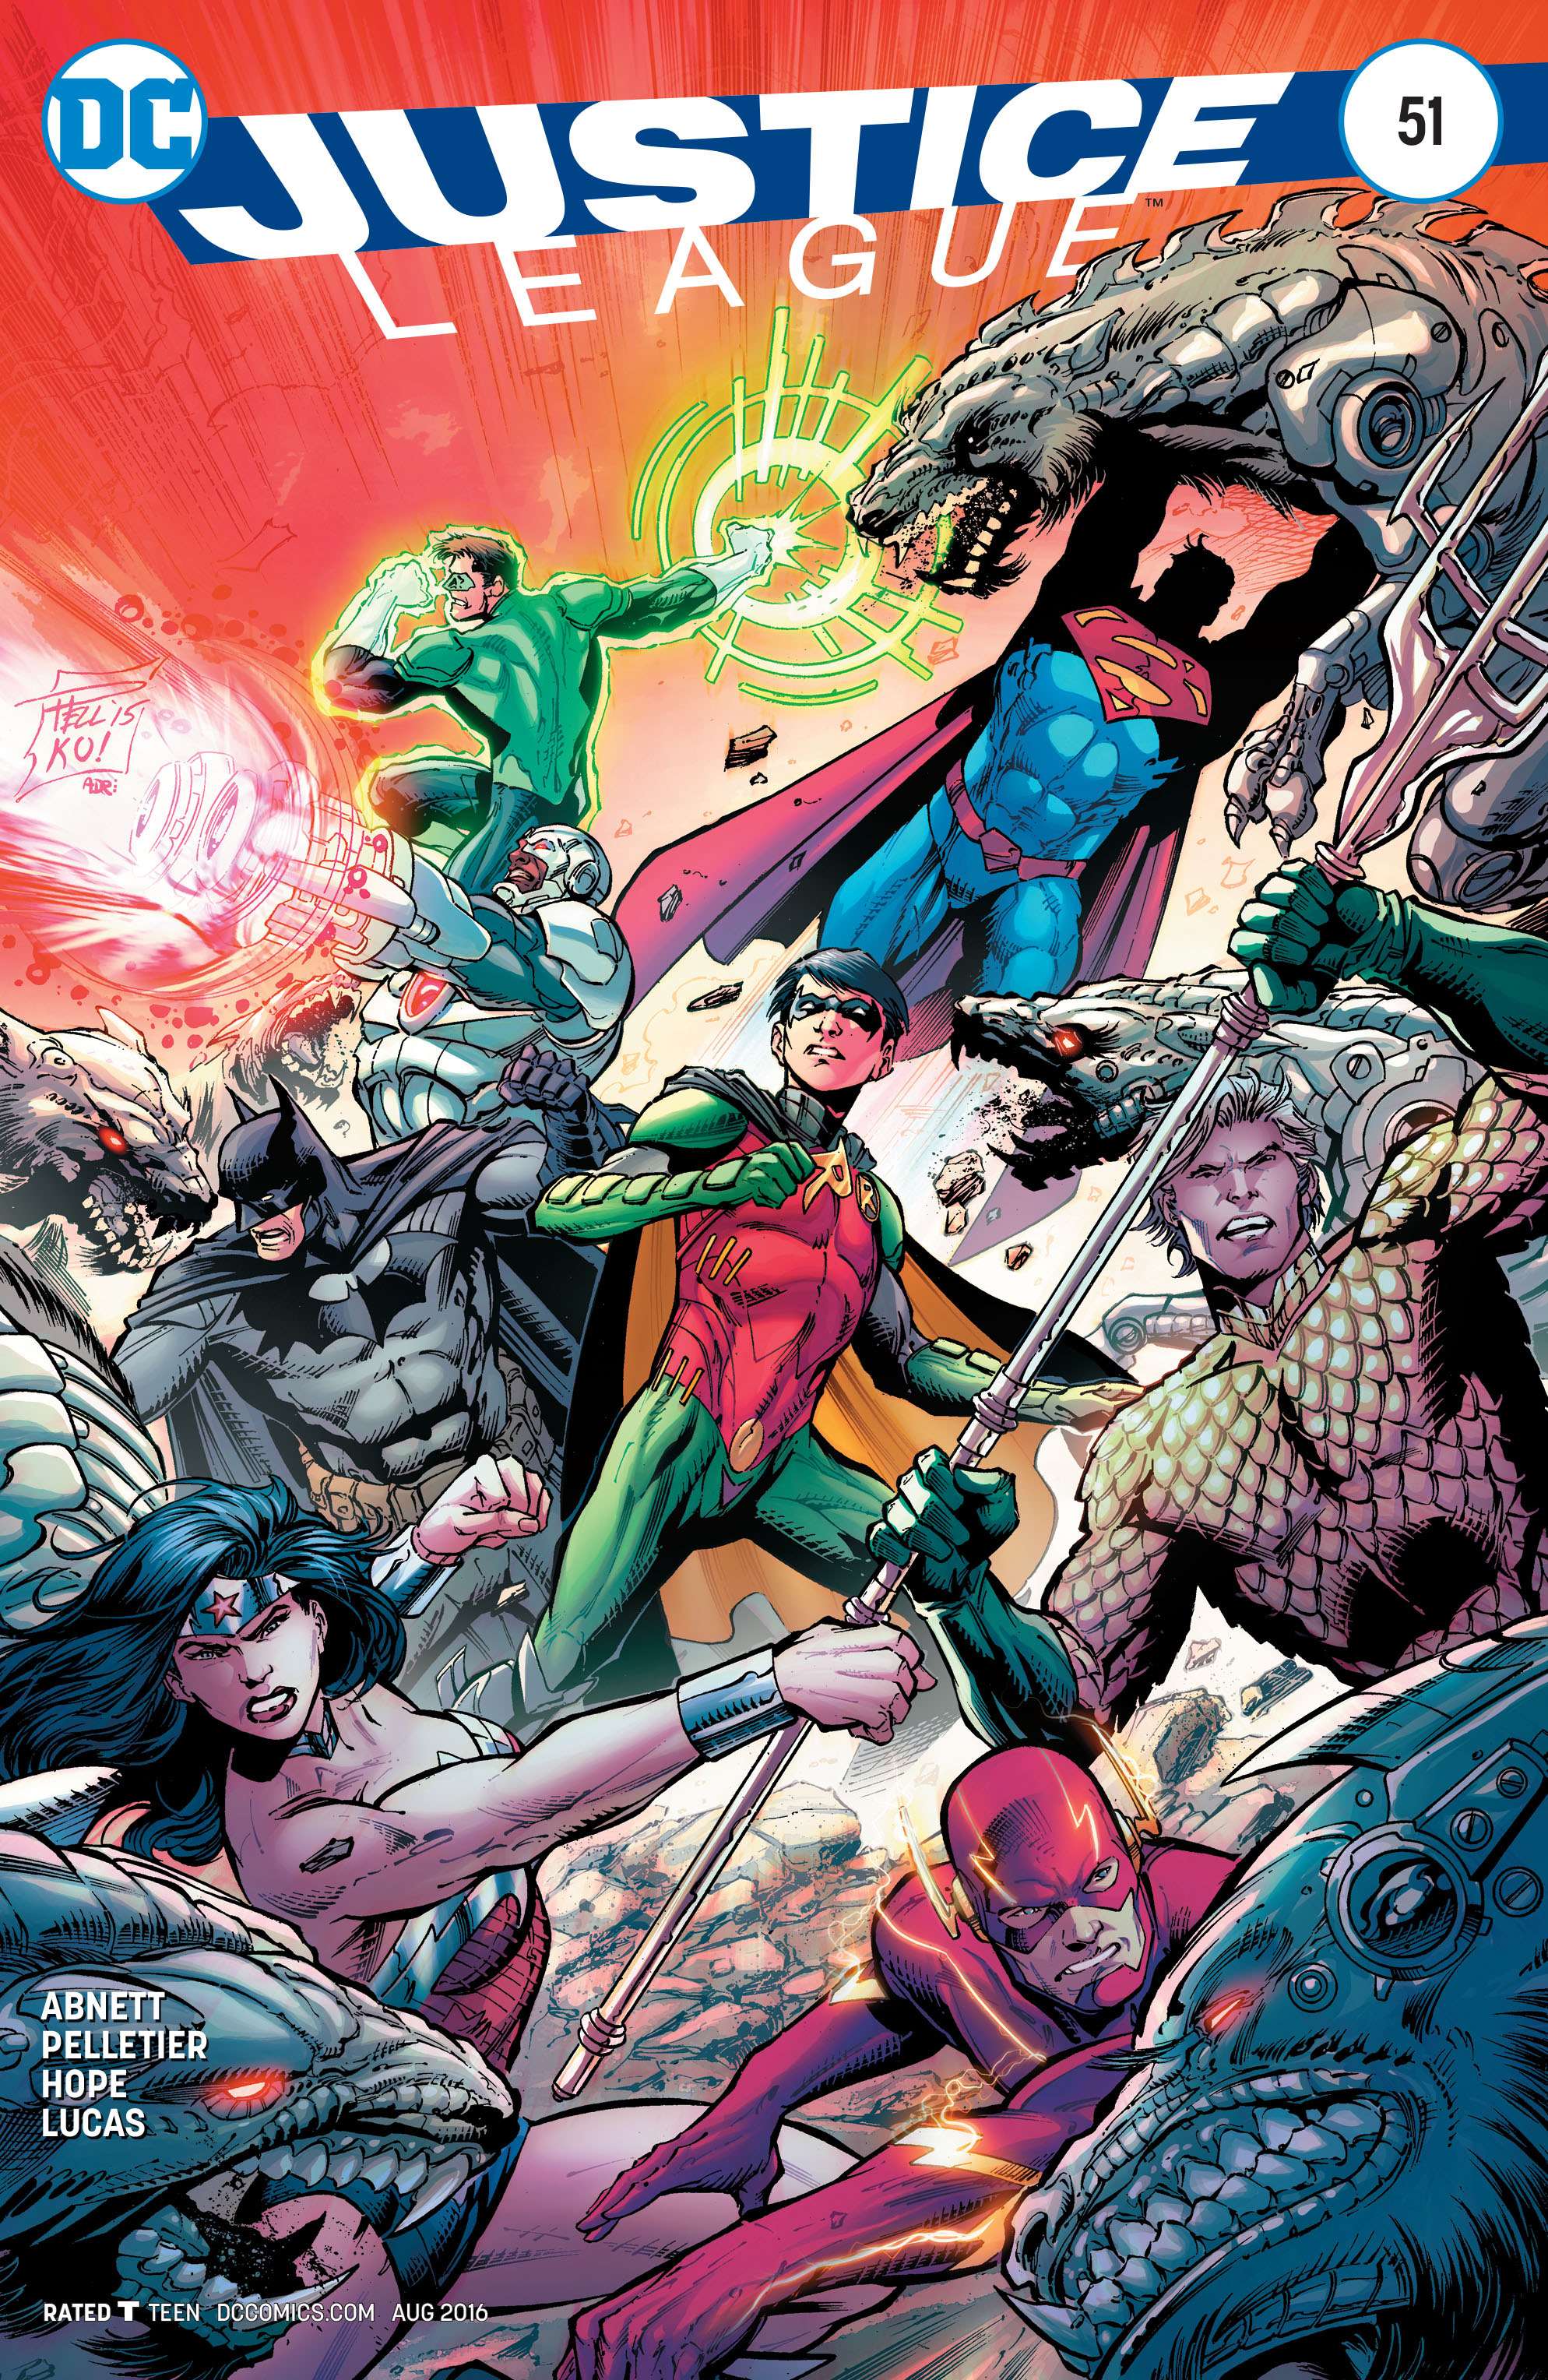 Read online Justice League (2011) comic -  Issue #51 - 1